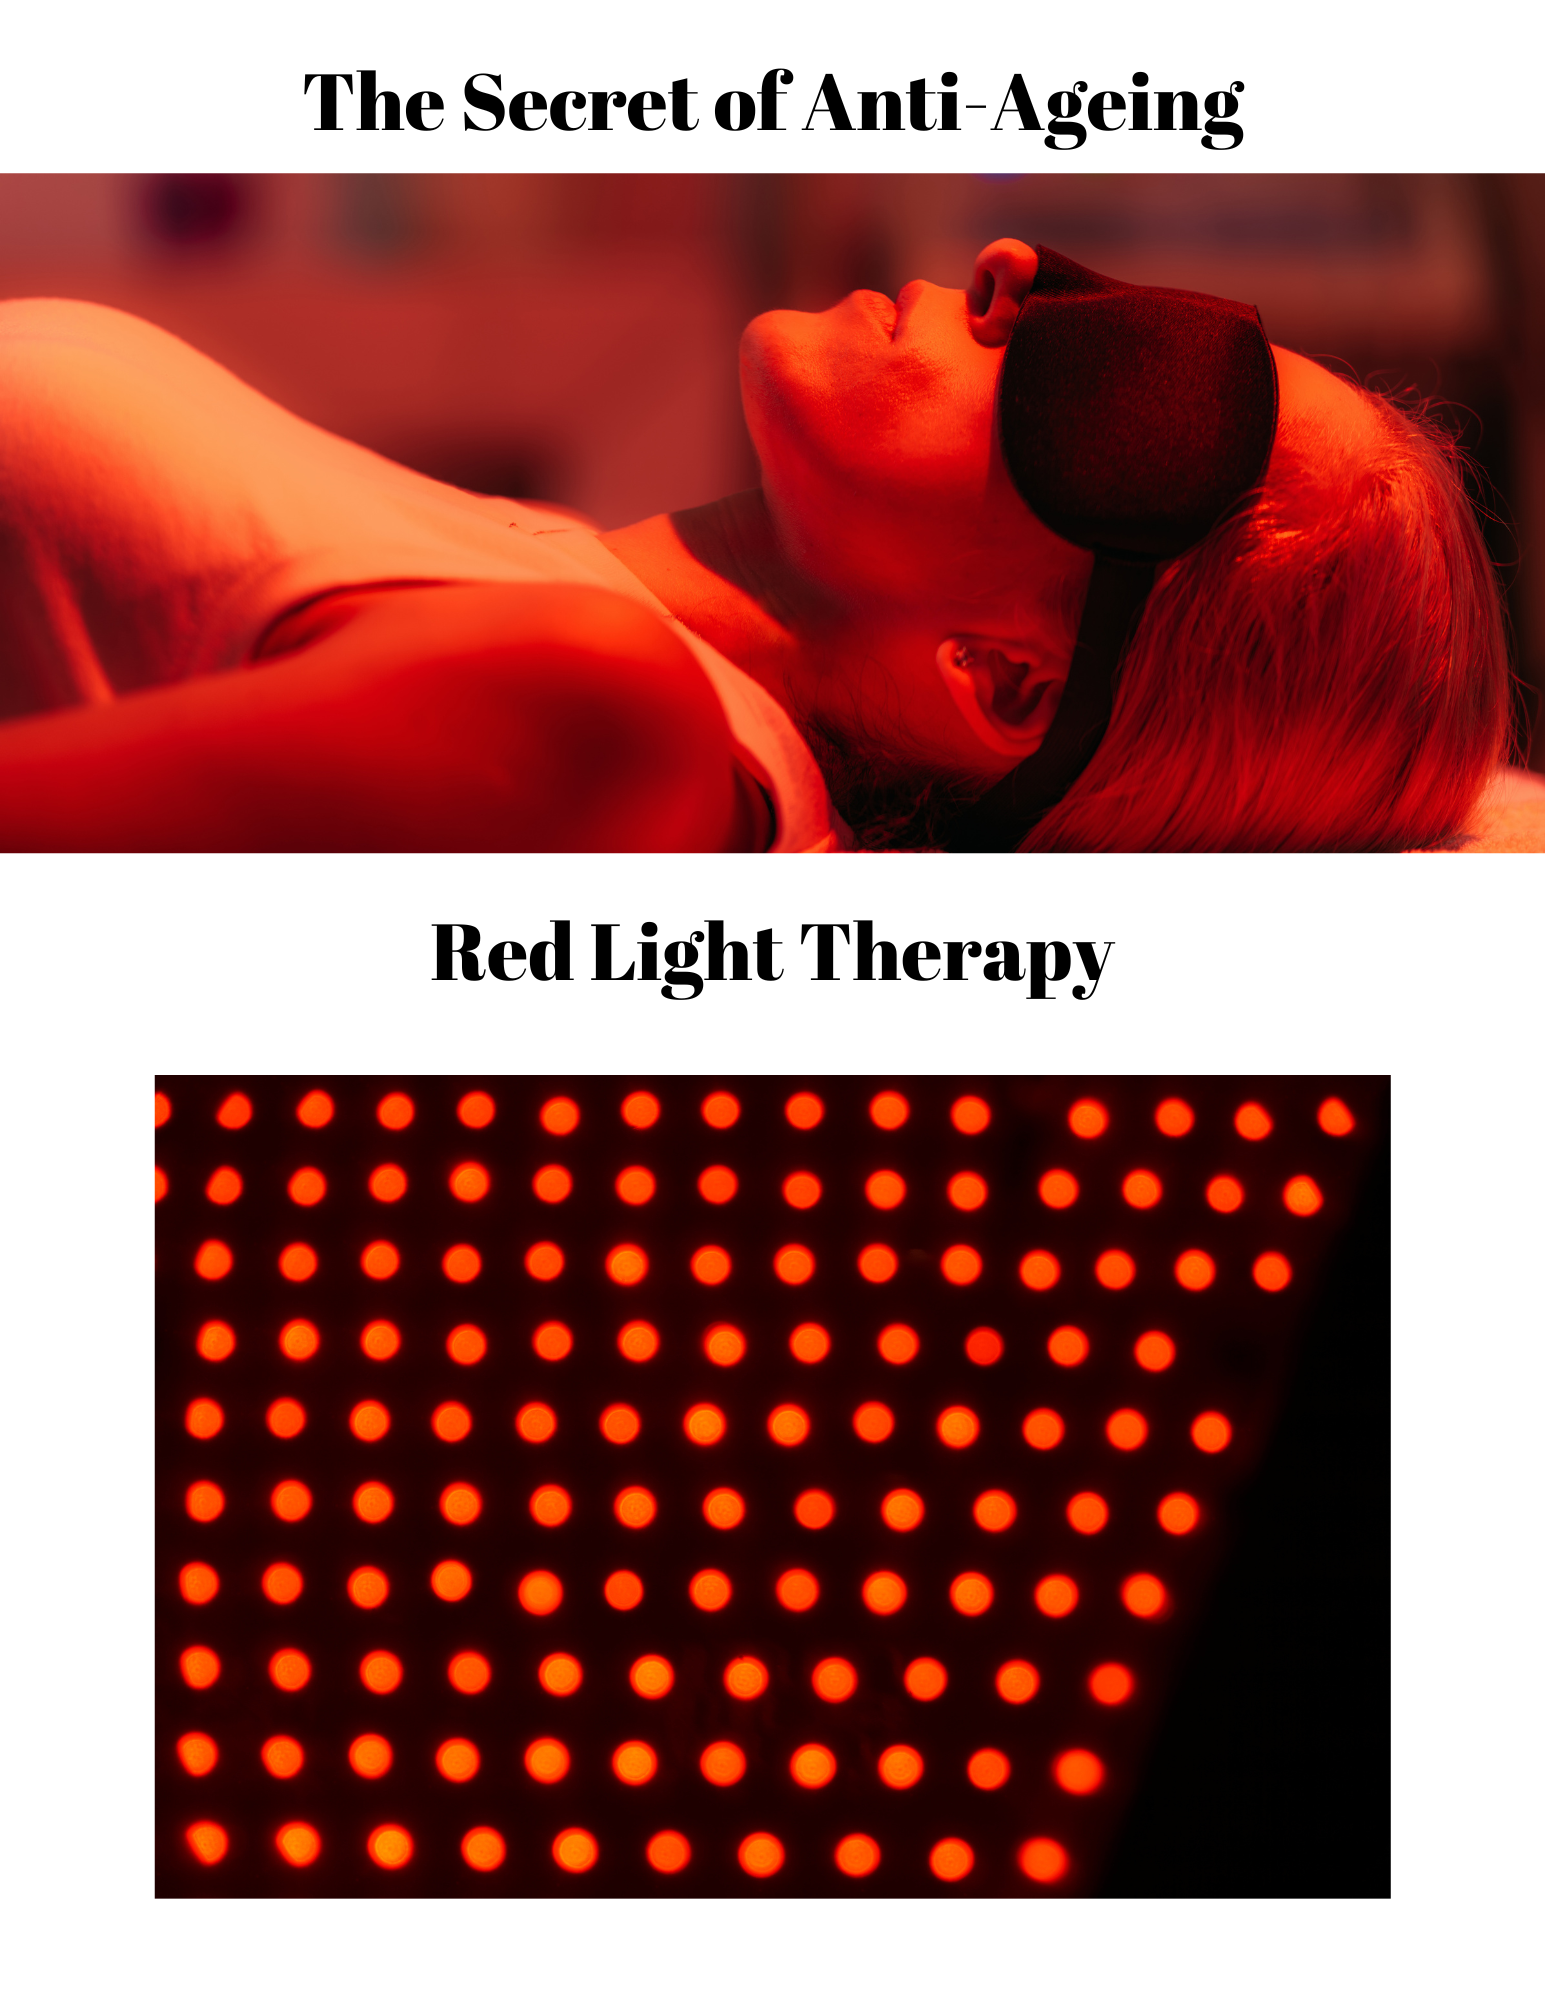 Red Light Therapy For Anti-Ageing